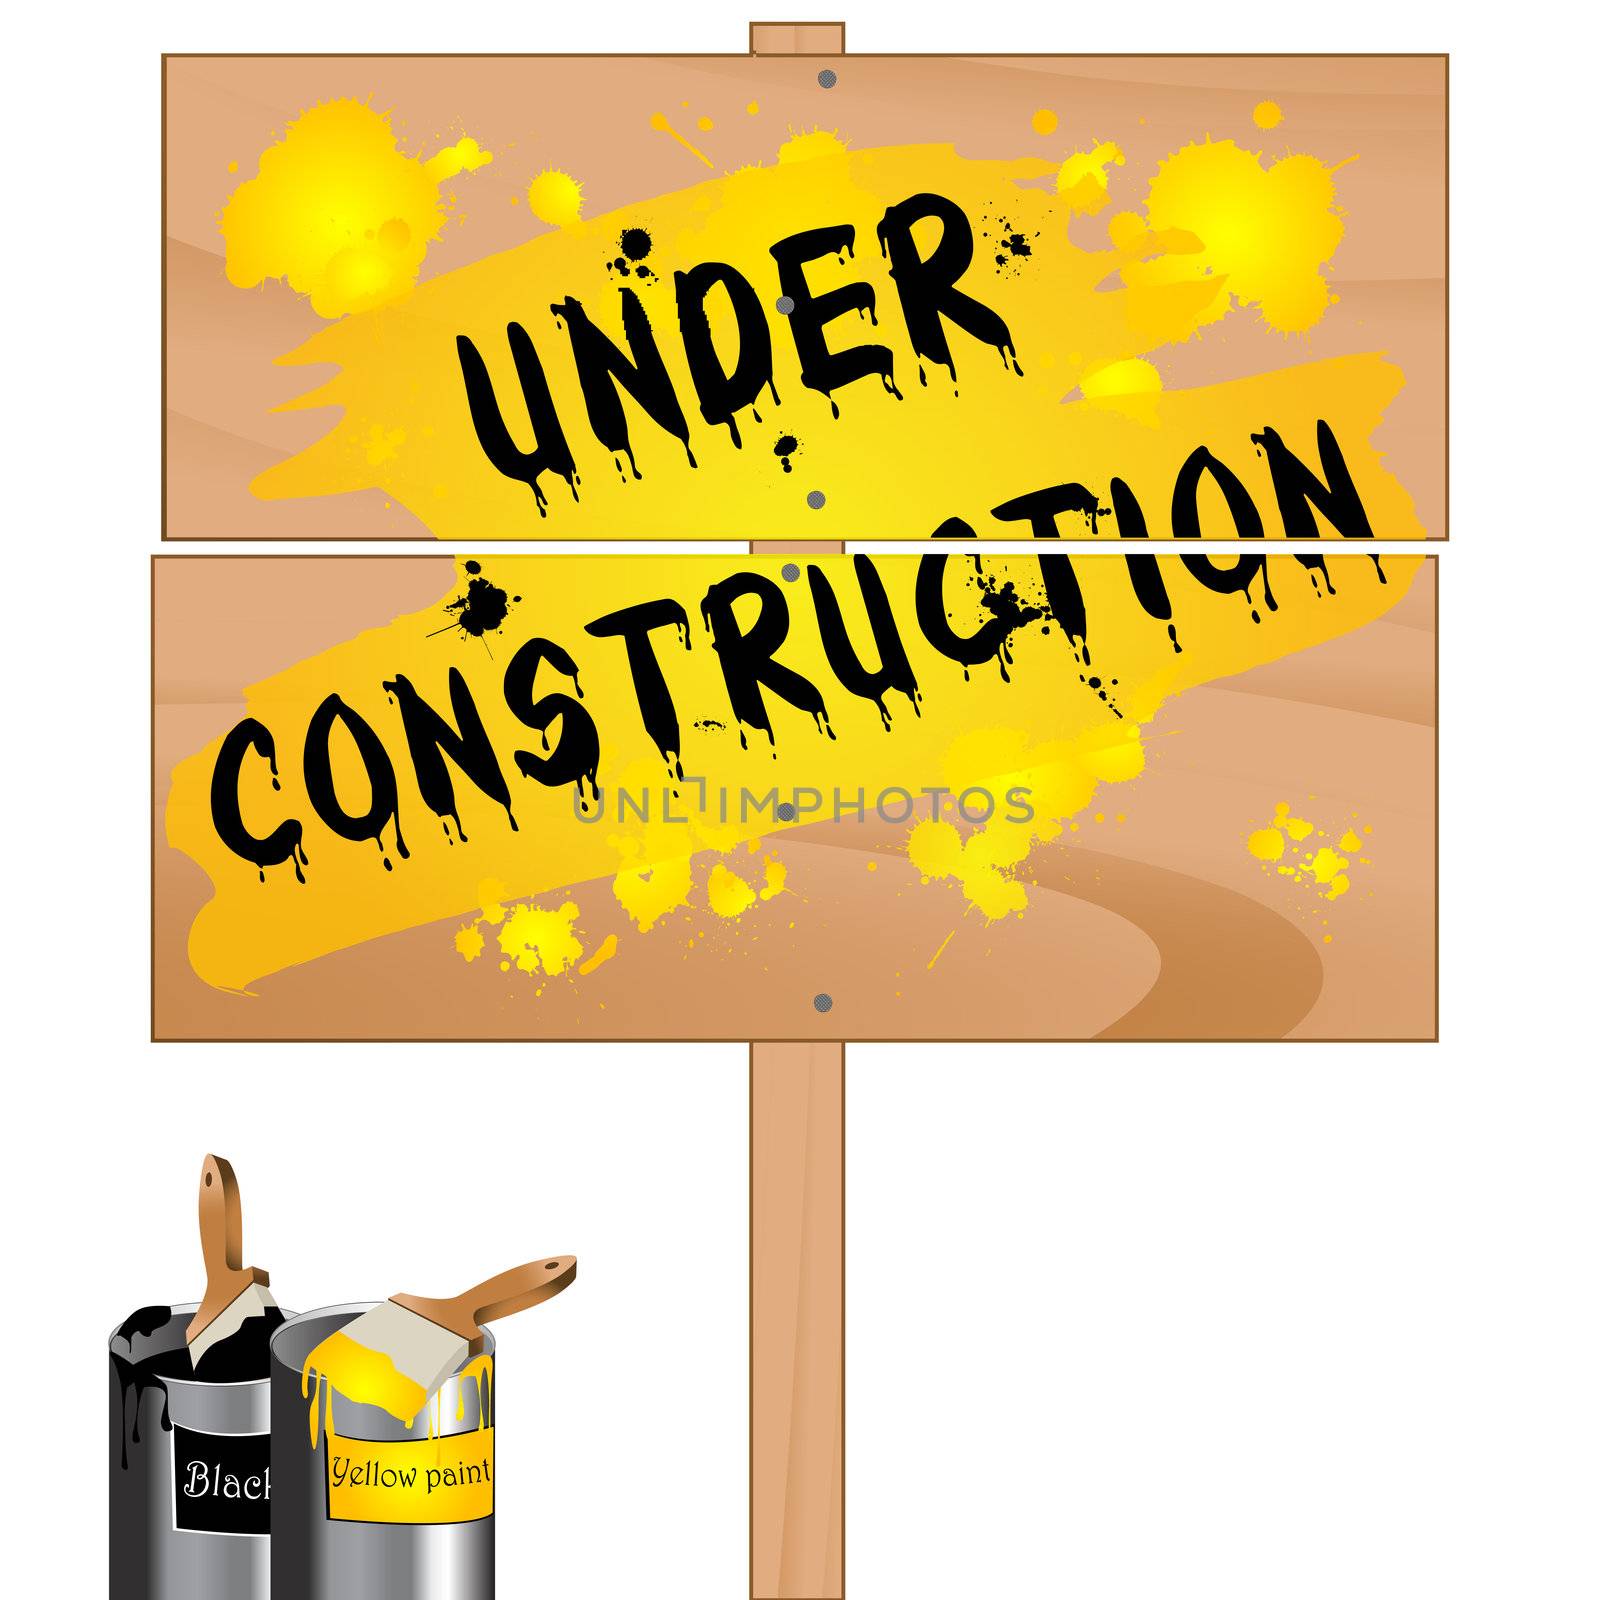 Under construction by Lirch